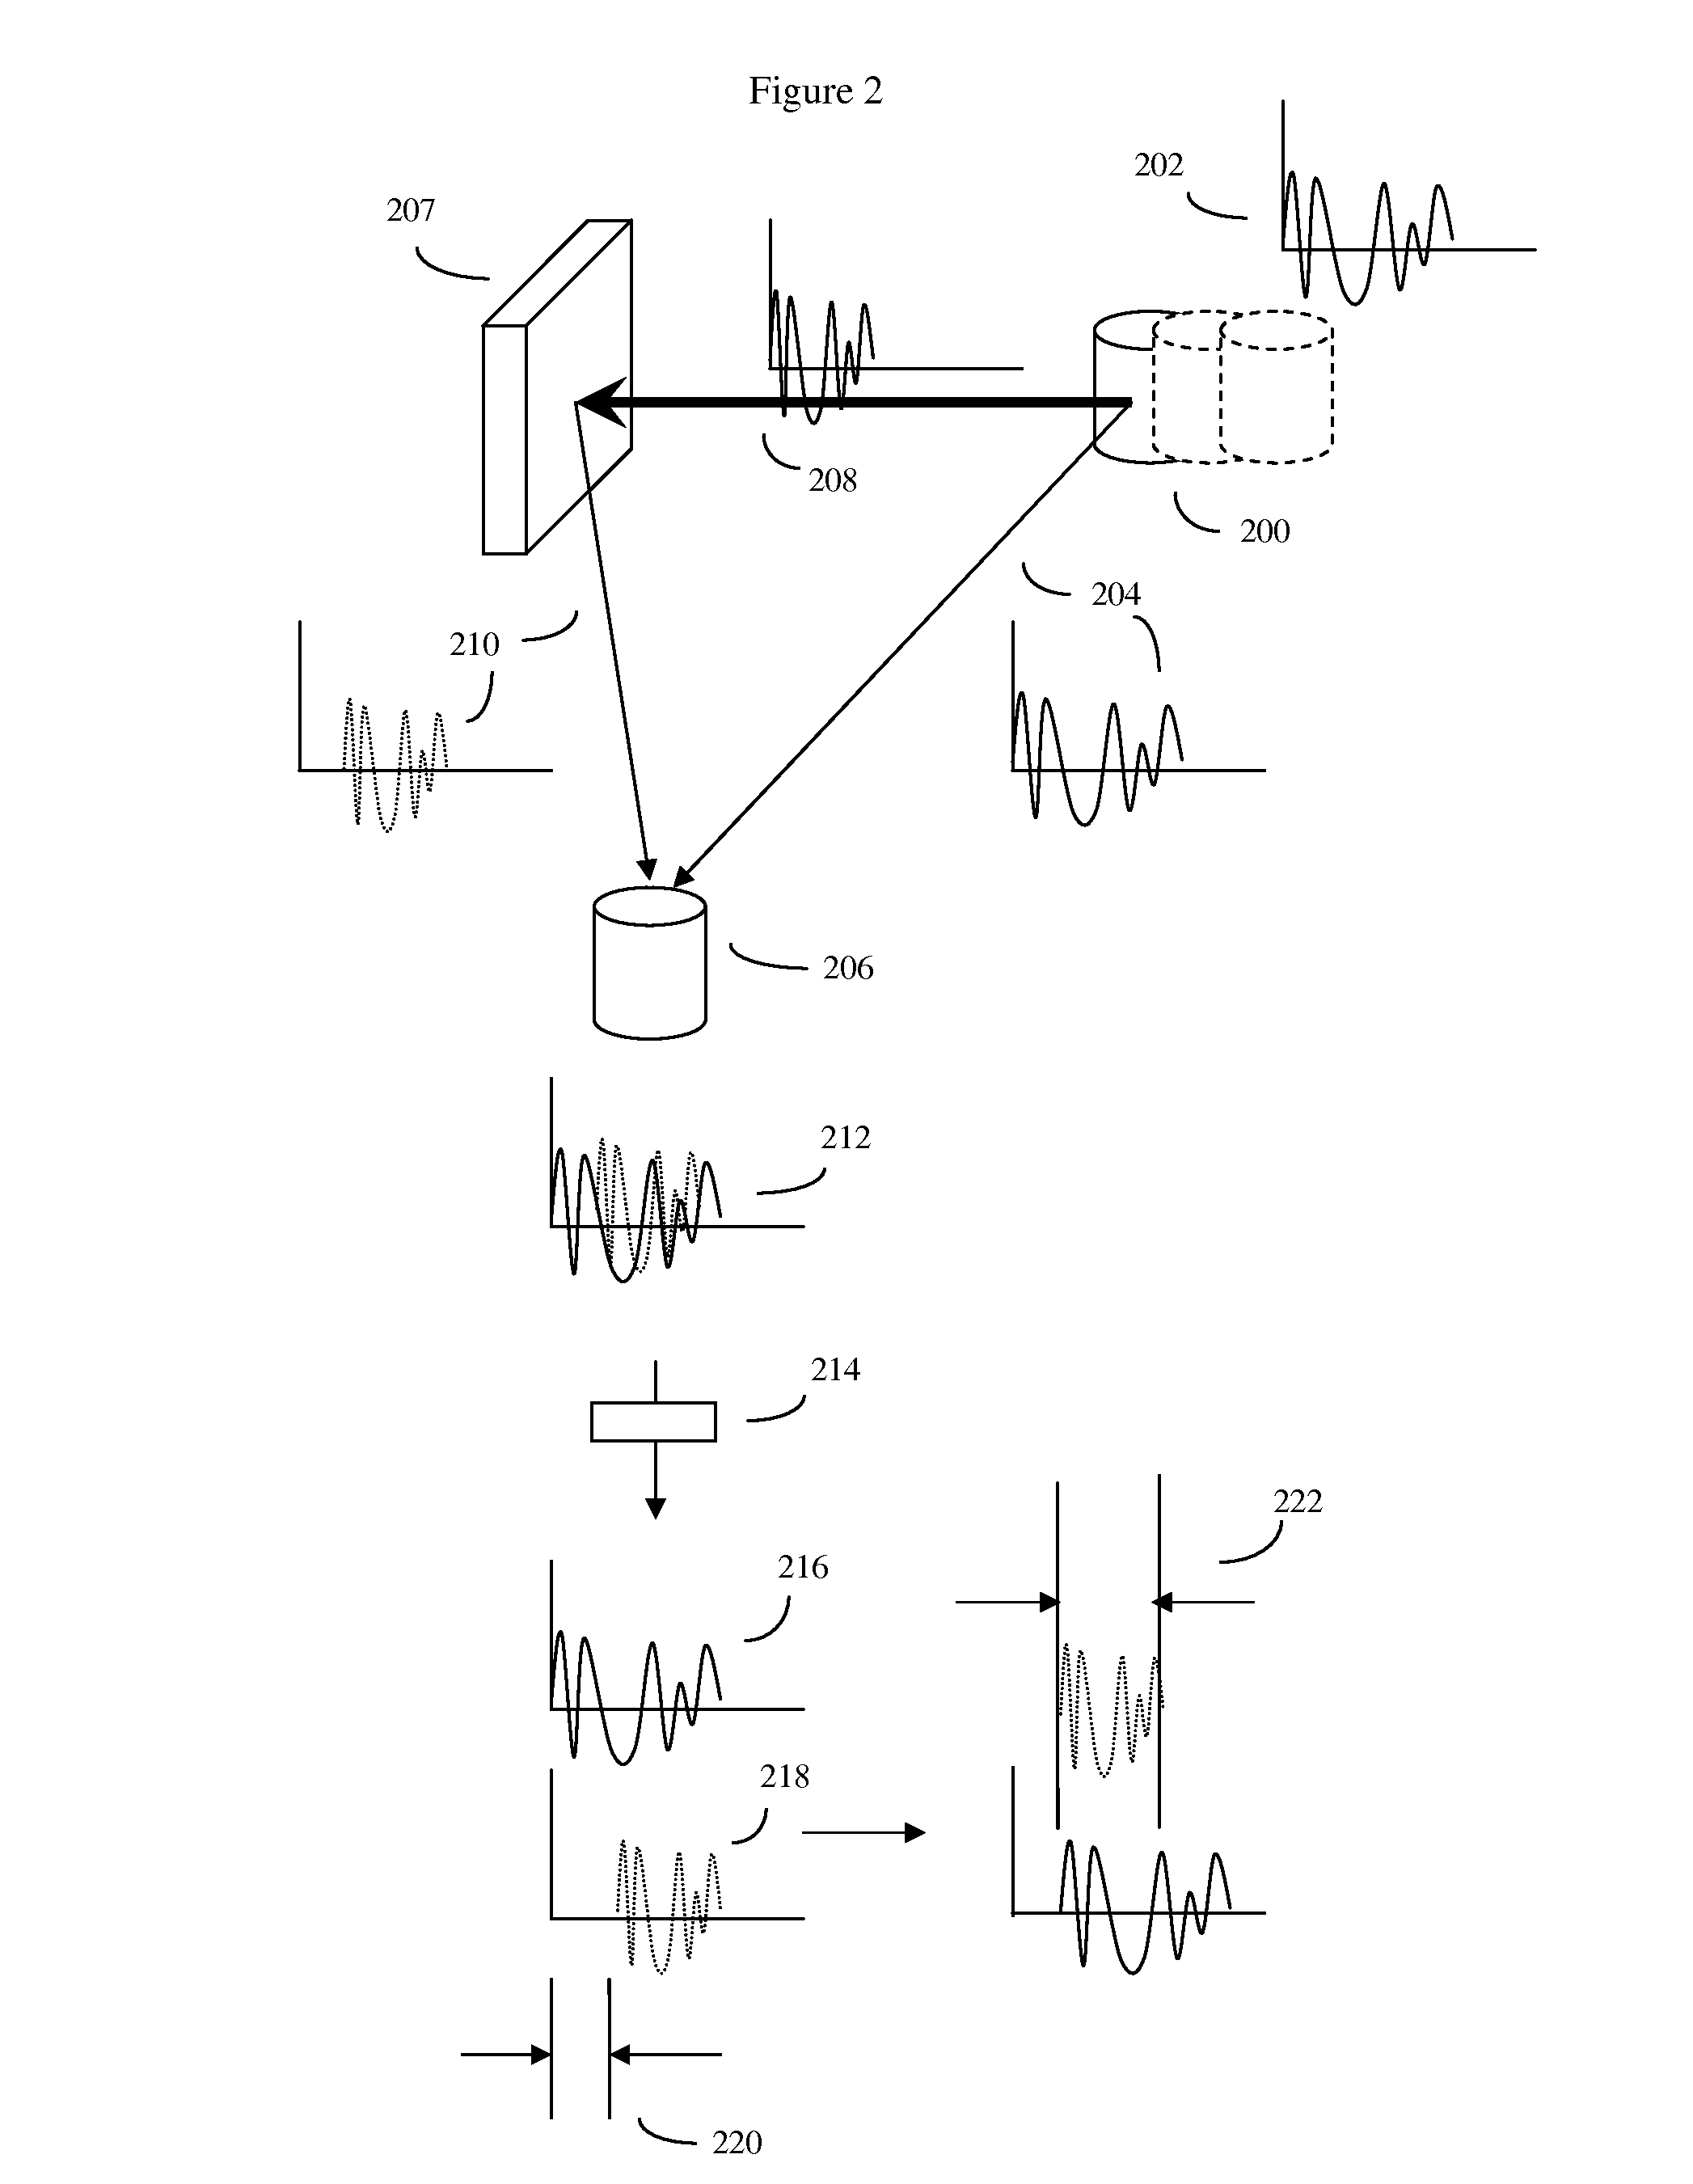 Signal modulation method resistant to echo reflections and frequency offsets